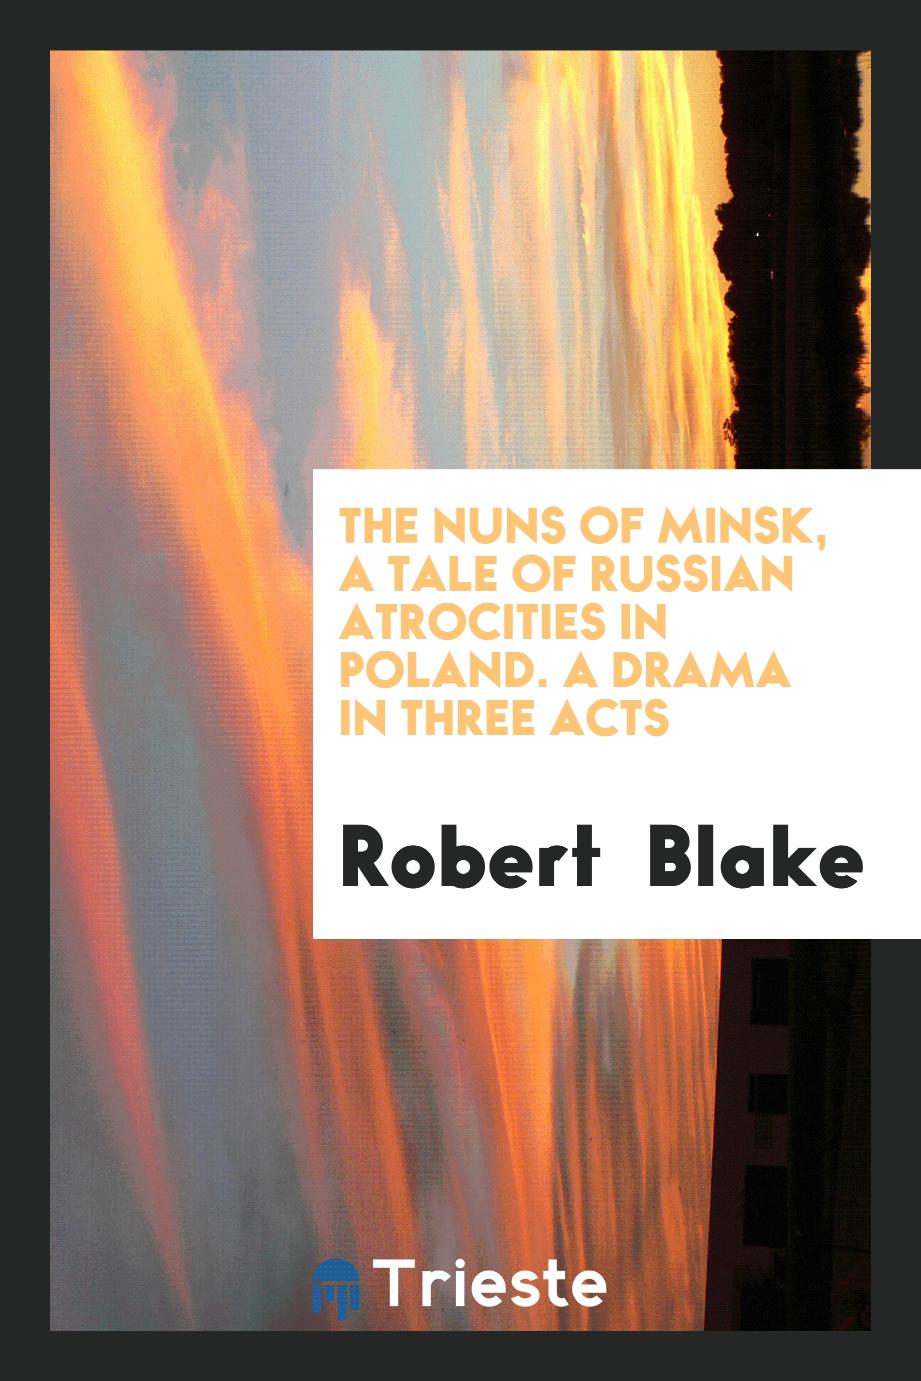 The nuns of Minsk, a tale of Russian atrocities in Poland. A drama in three acts